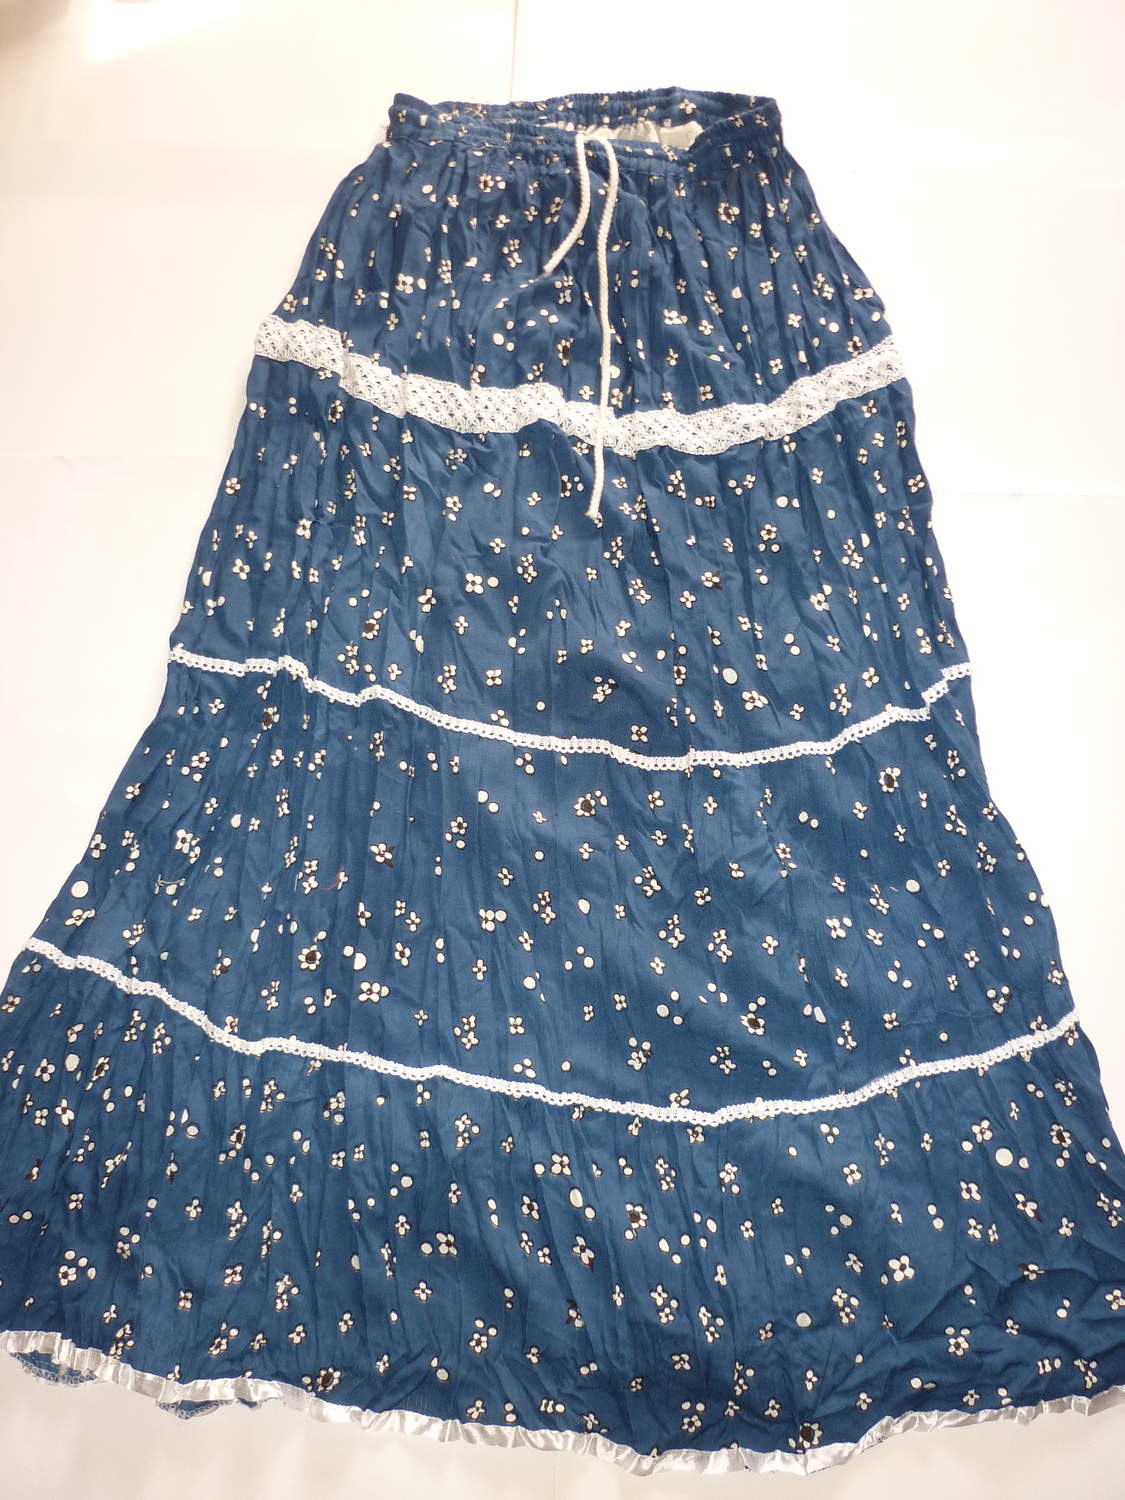 INDIAN FLORAL LONG SKIRT FOR LADIES ll GUARANTEED LOWEST PRICE ll DO NOT MISS THIS CHANCE ll FREE HOME( POSTNORD) DELIVERY ll DISCOUNT 25 % ll ART.NO.  44708333